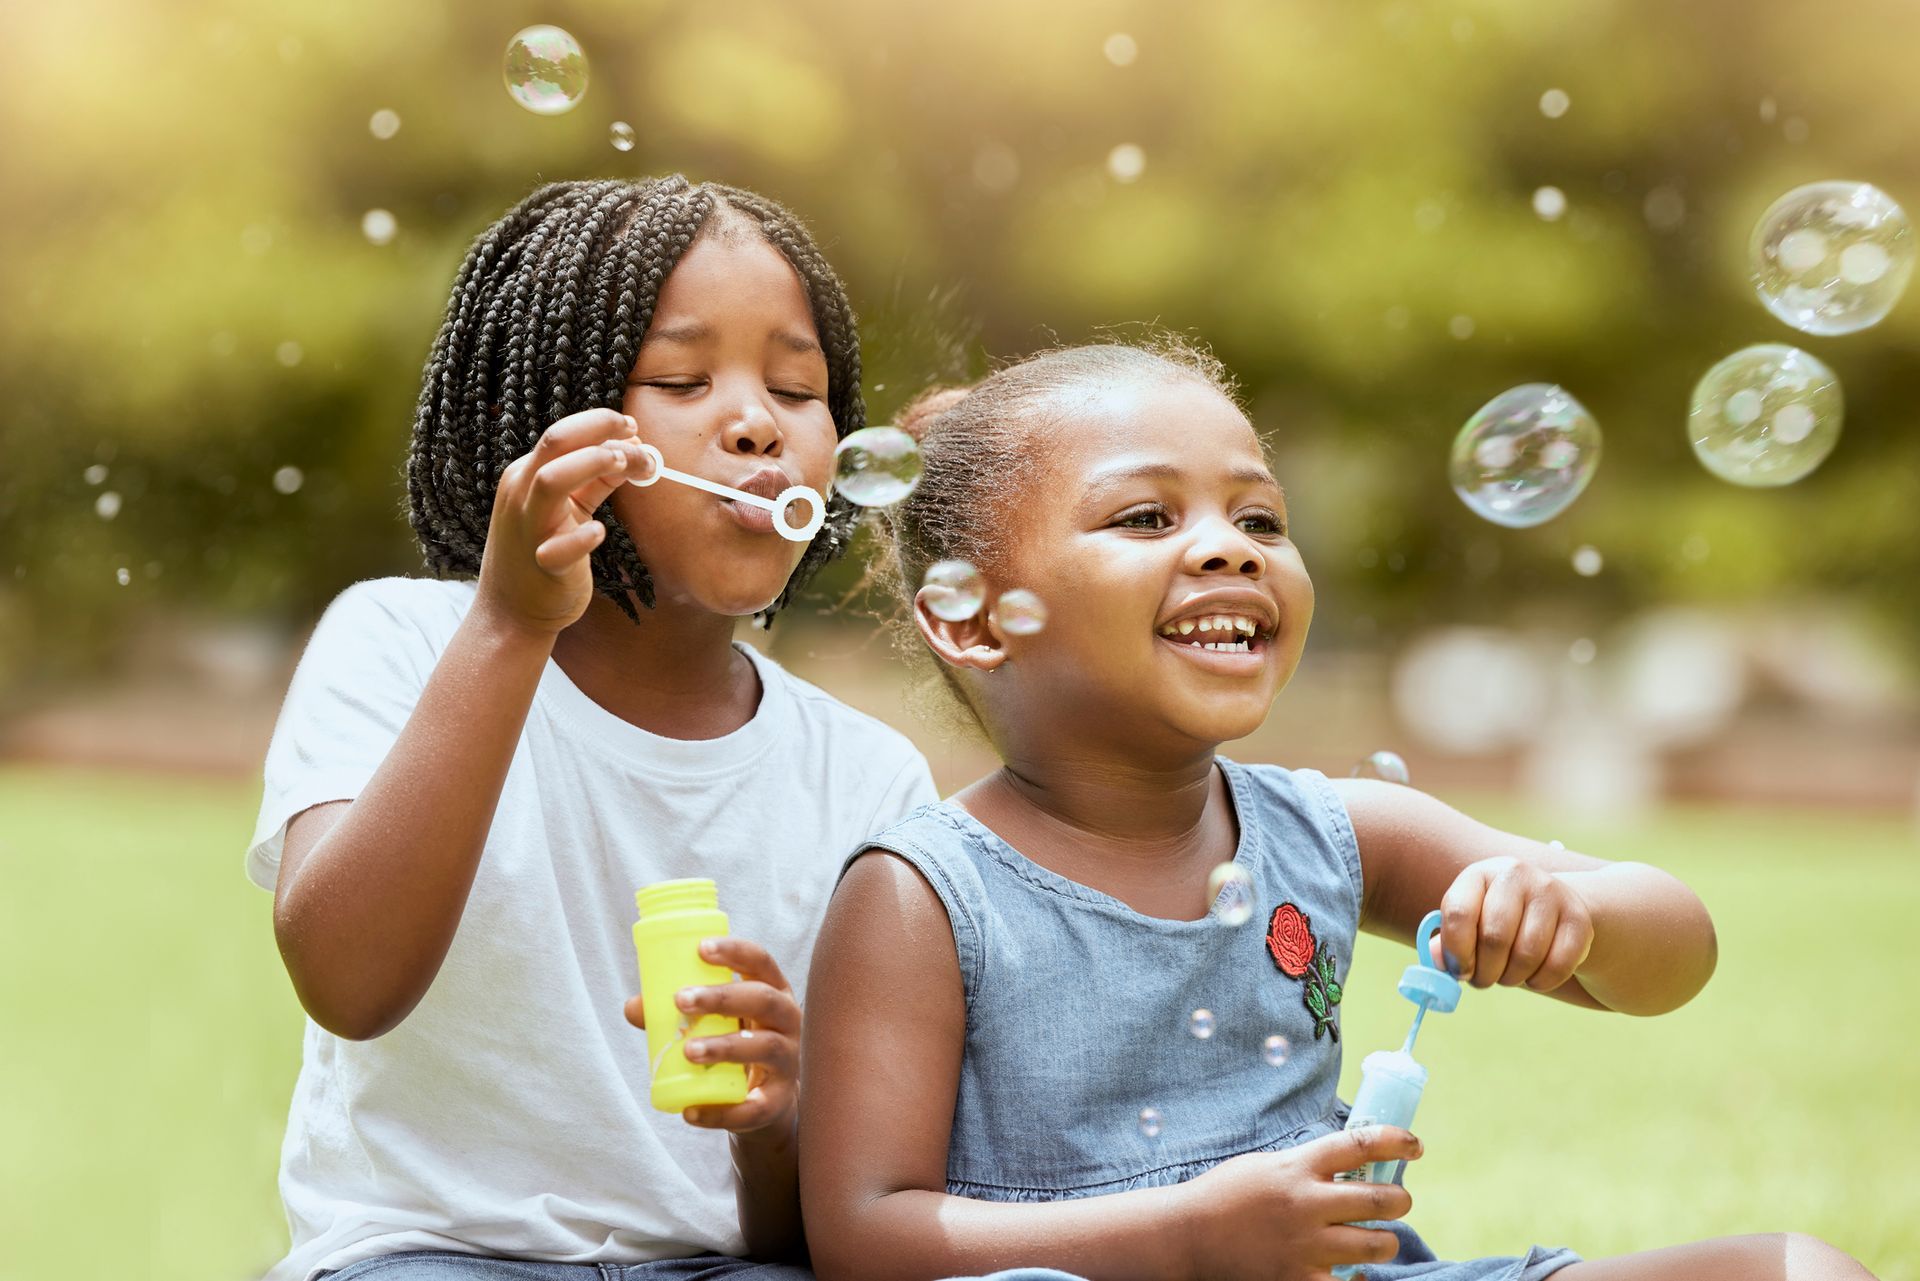 two little girls are blowing soap bubbles in a park .